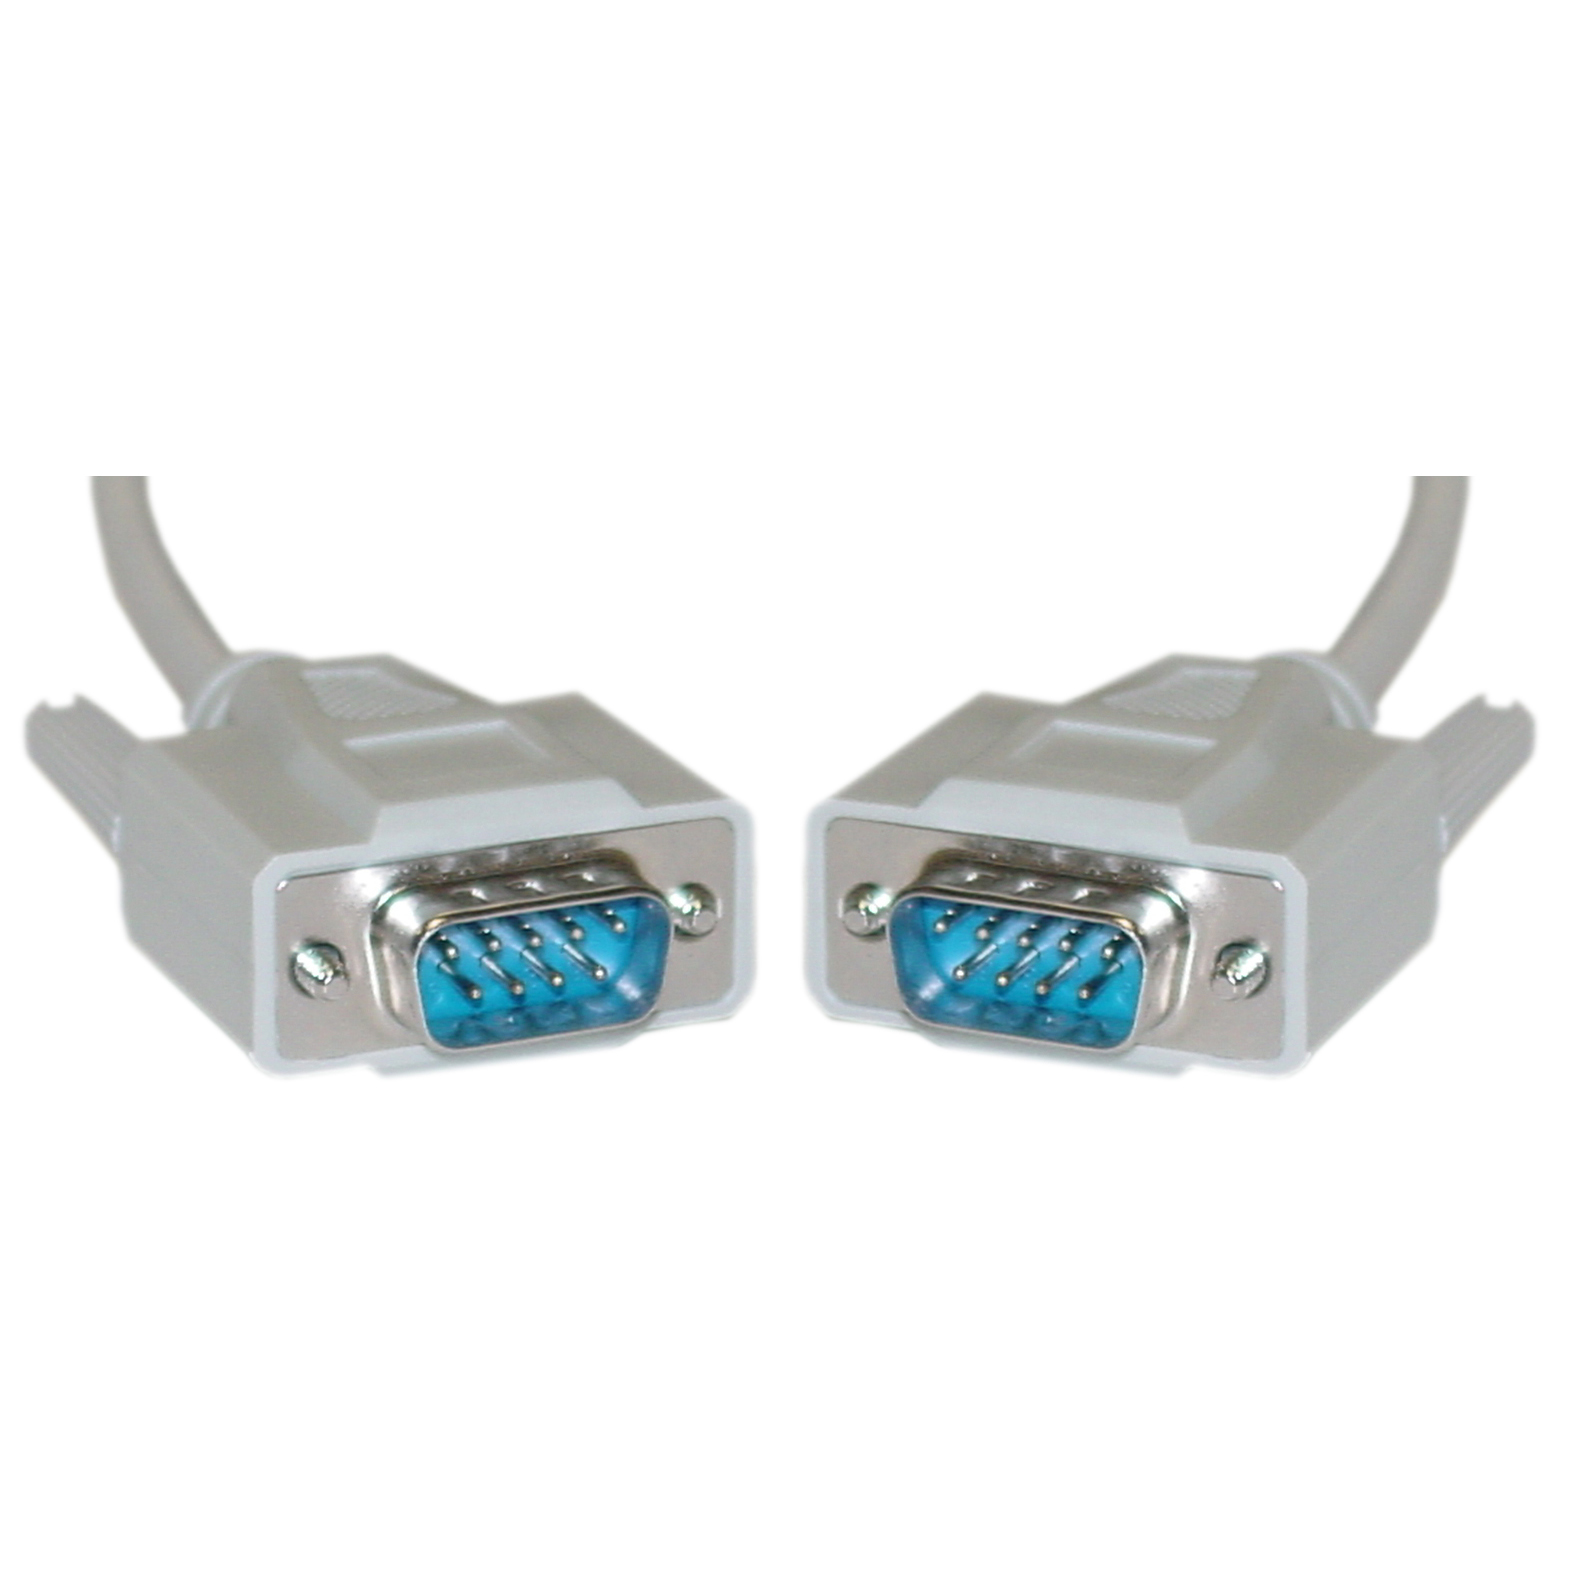 3ft DB9 Male to Male Straight-Through Fully Wired Serial RS232 Cable S-3303